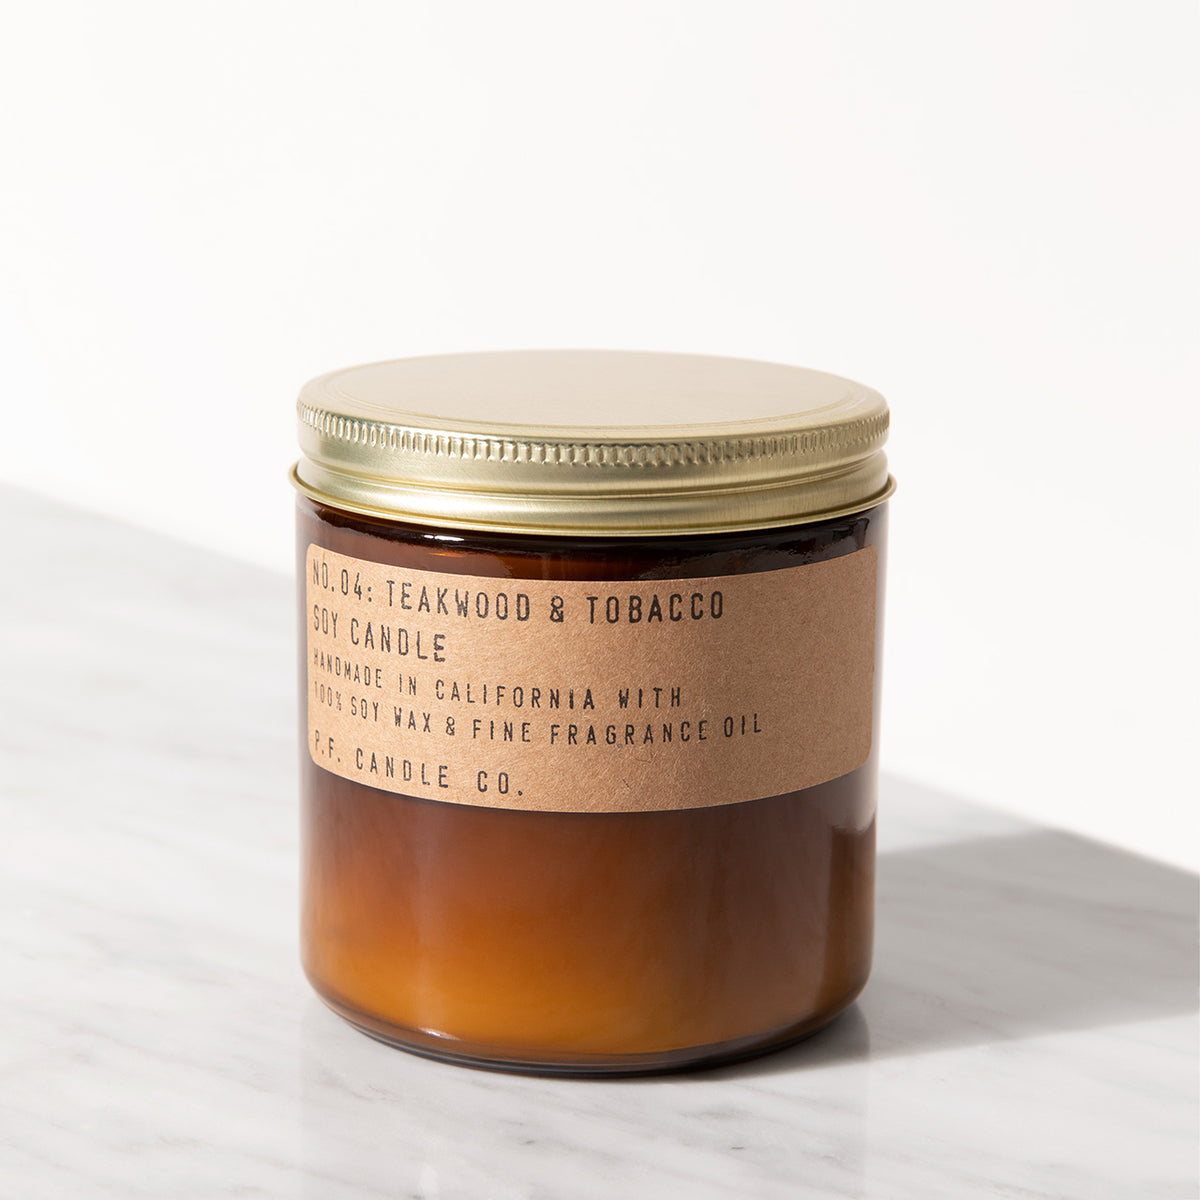 Large Candle - teakwood and tobacco by PF Candle